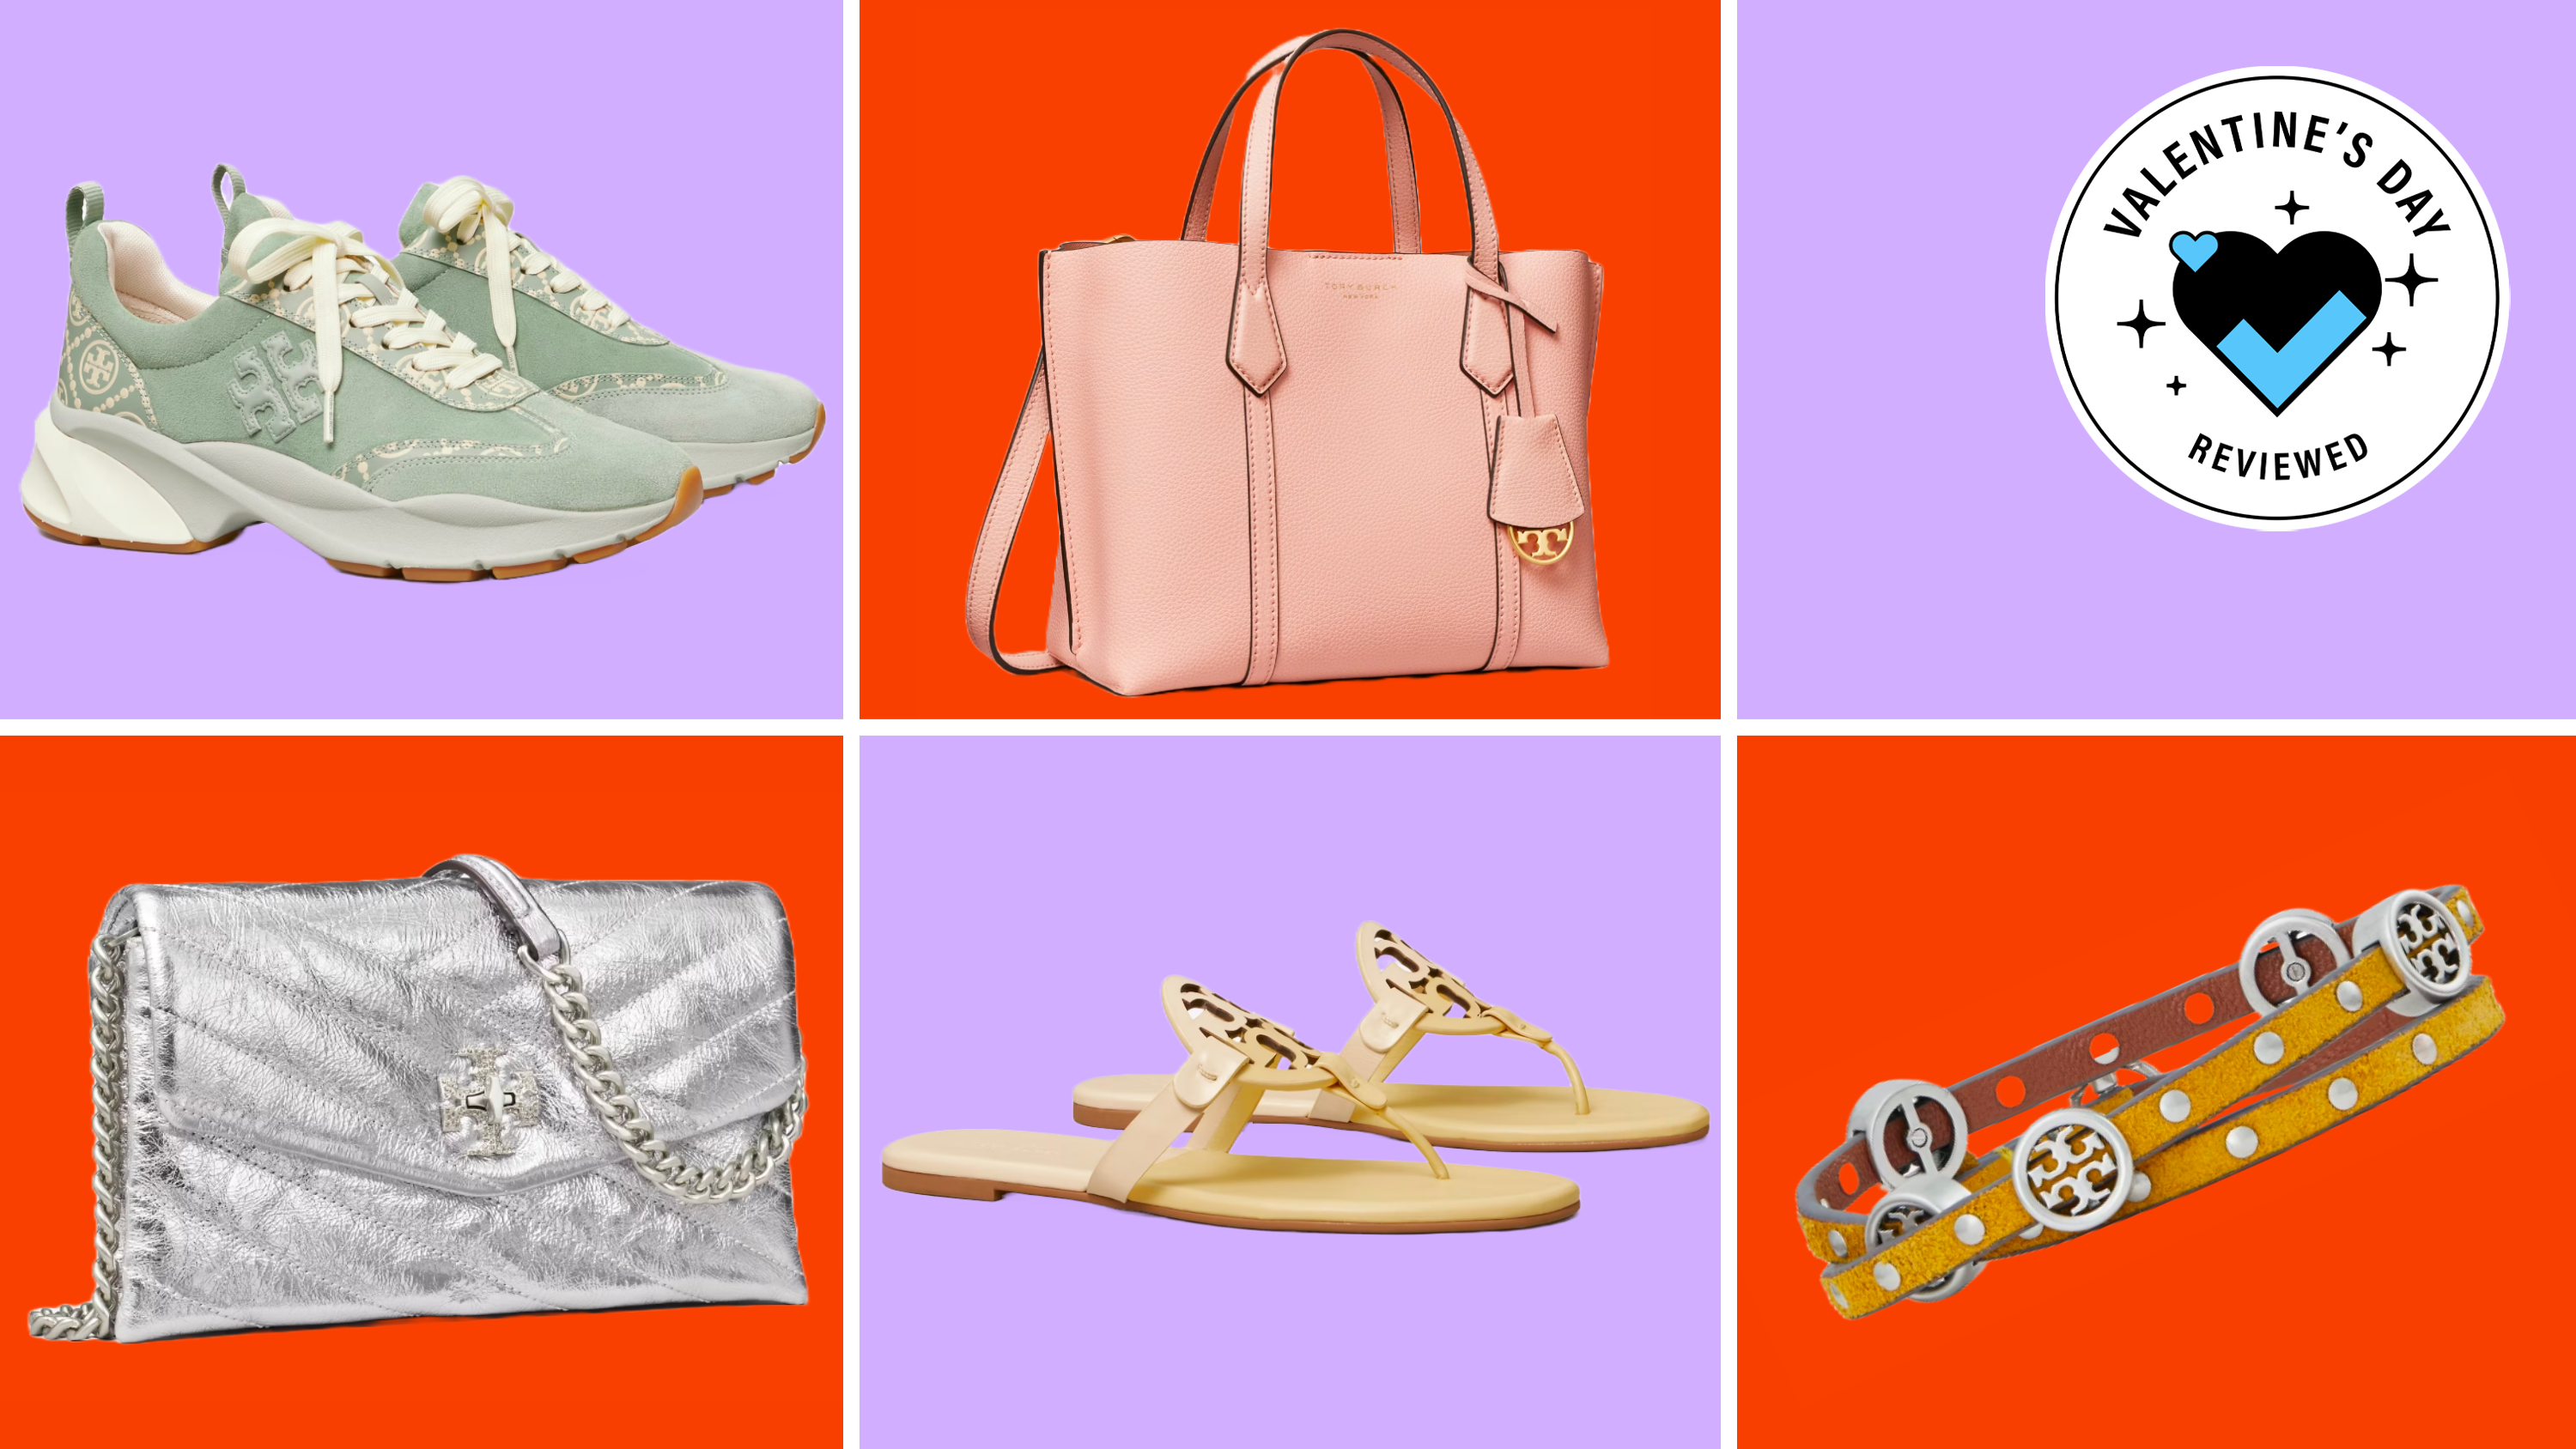 Tory Burch Valentine's Day deals: Save up to 50% on purses and shoes